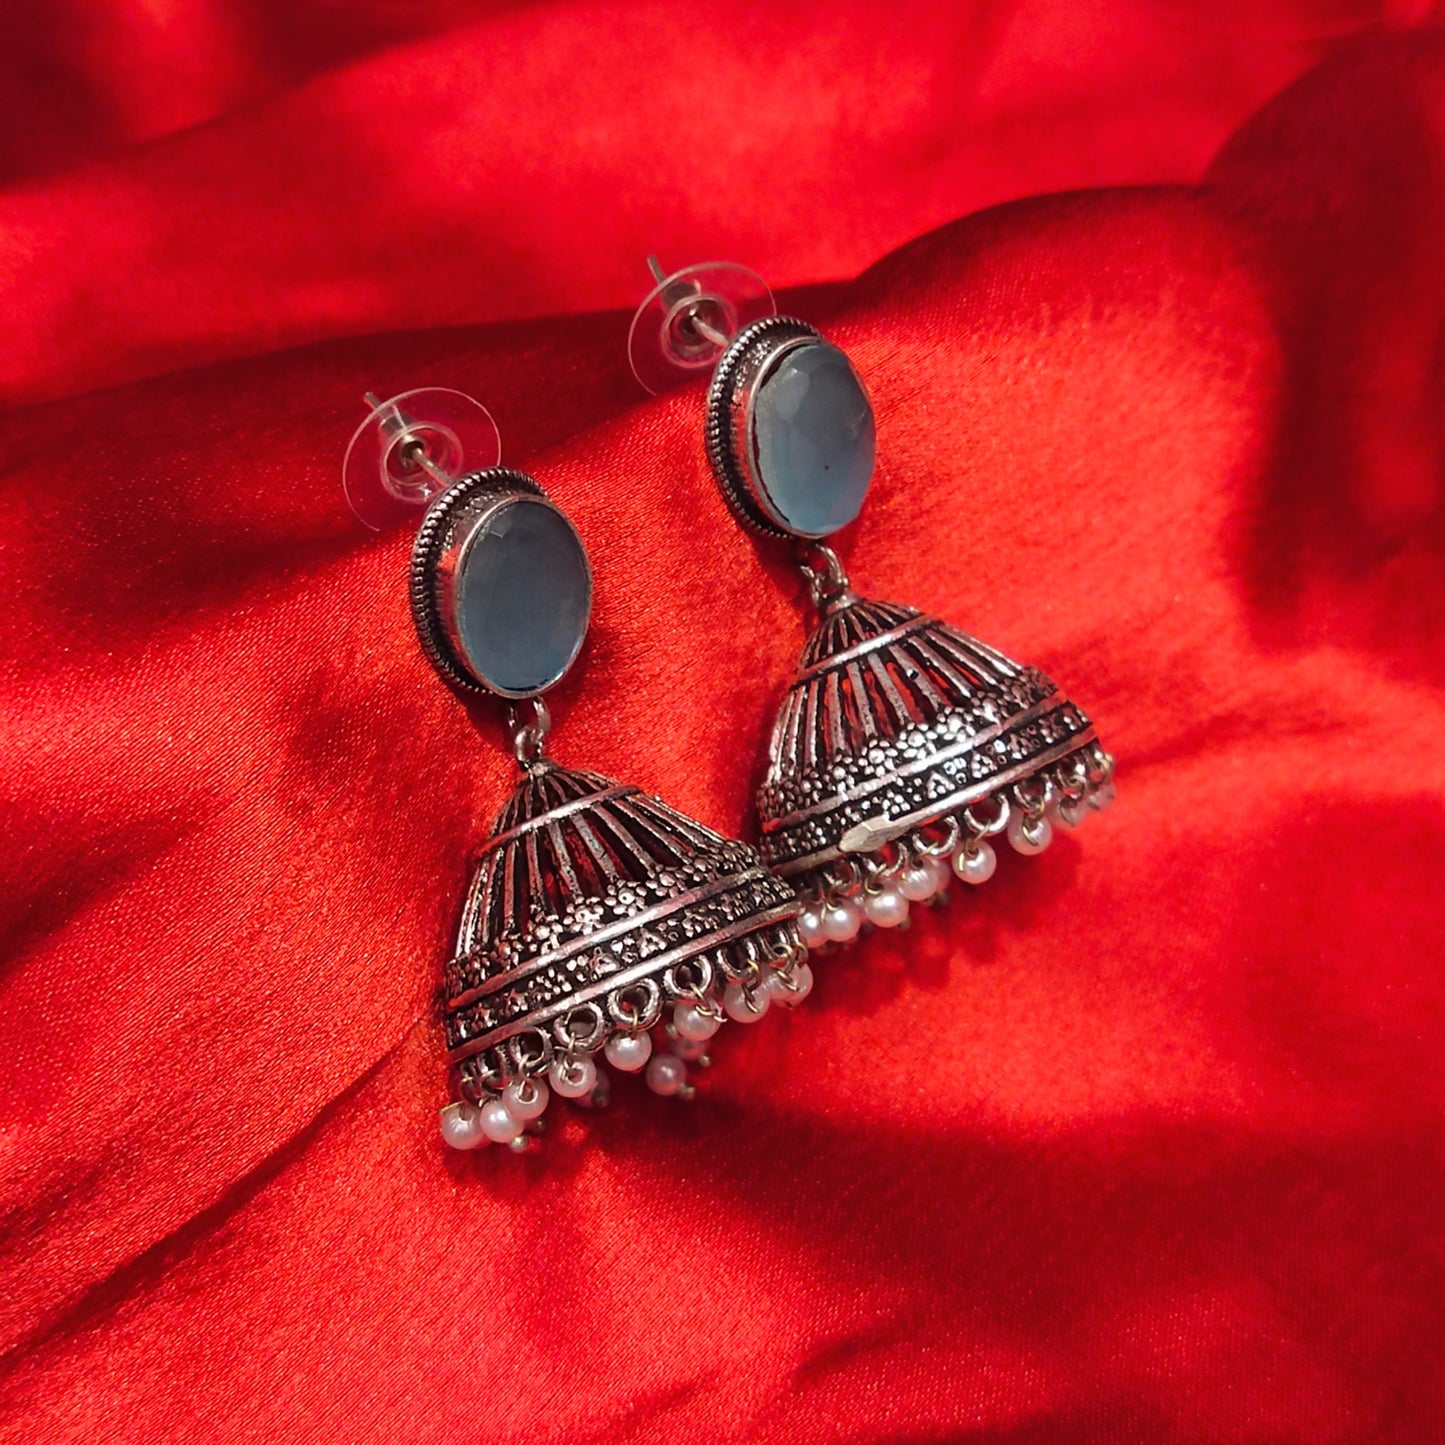 "Dazzling Elegance: Embrace Style with Oxidized Jermon Silver Jhumka Earrings by Asp Fashion Jewellery"